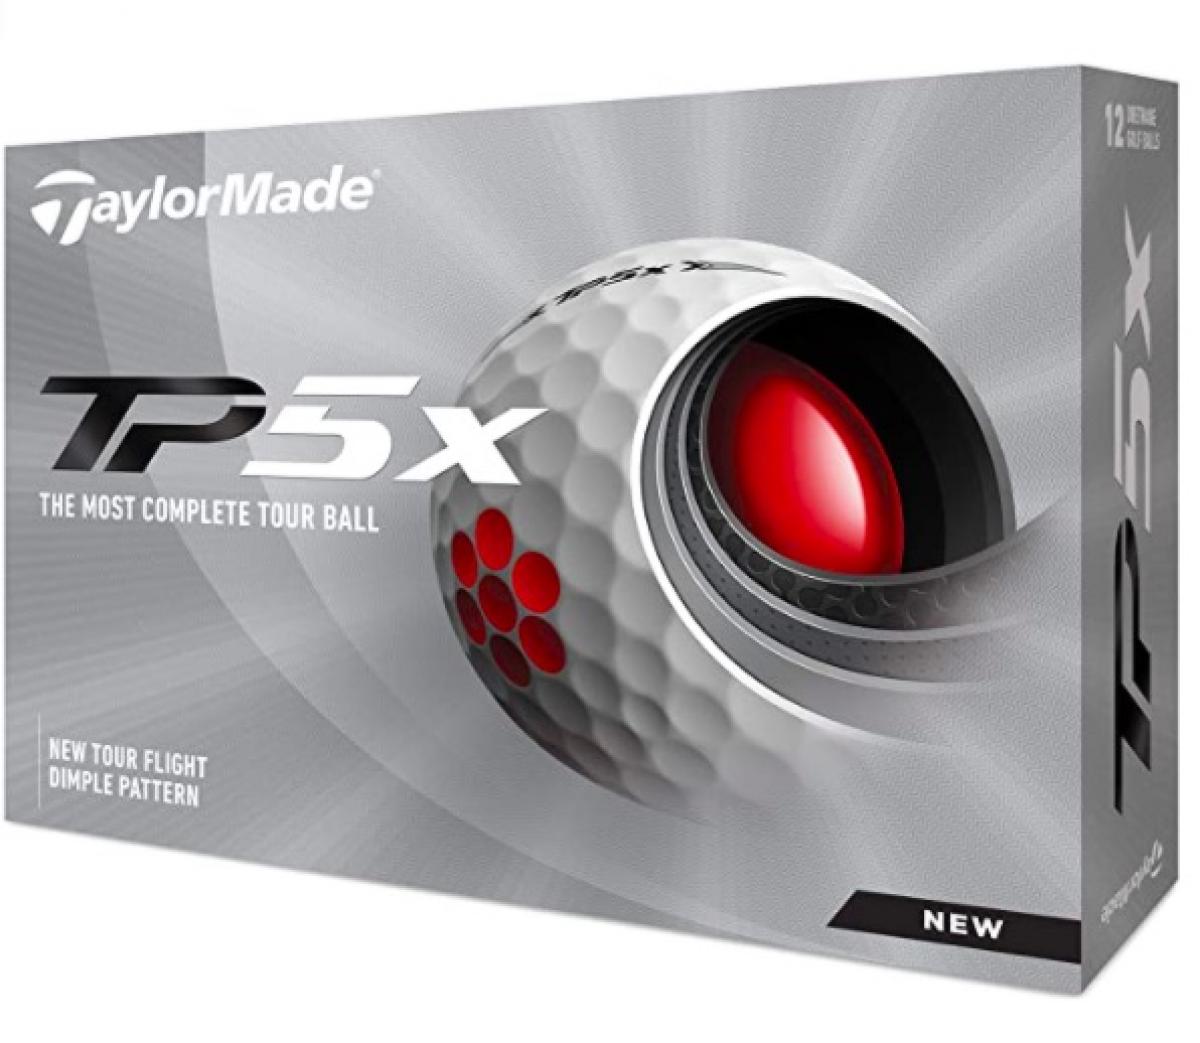 These AMAZING TaylorMade golf balls will improve your game immediately...